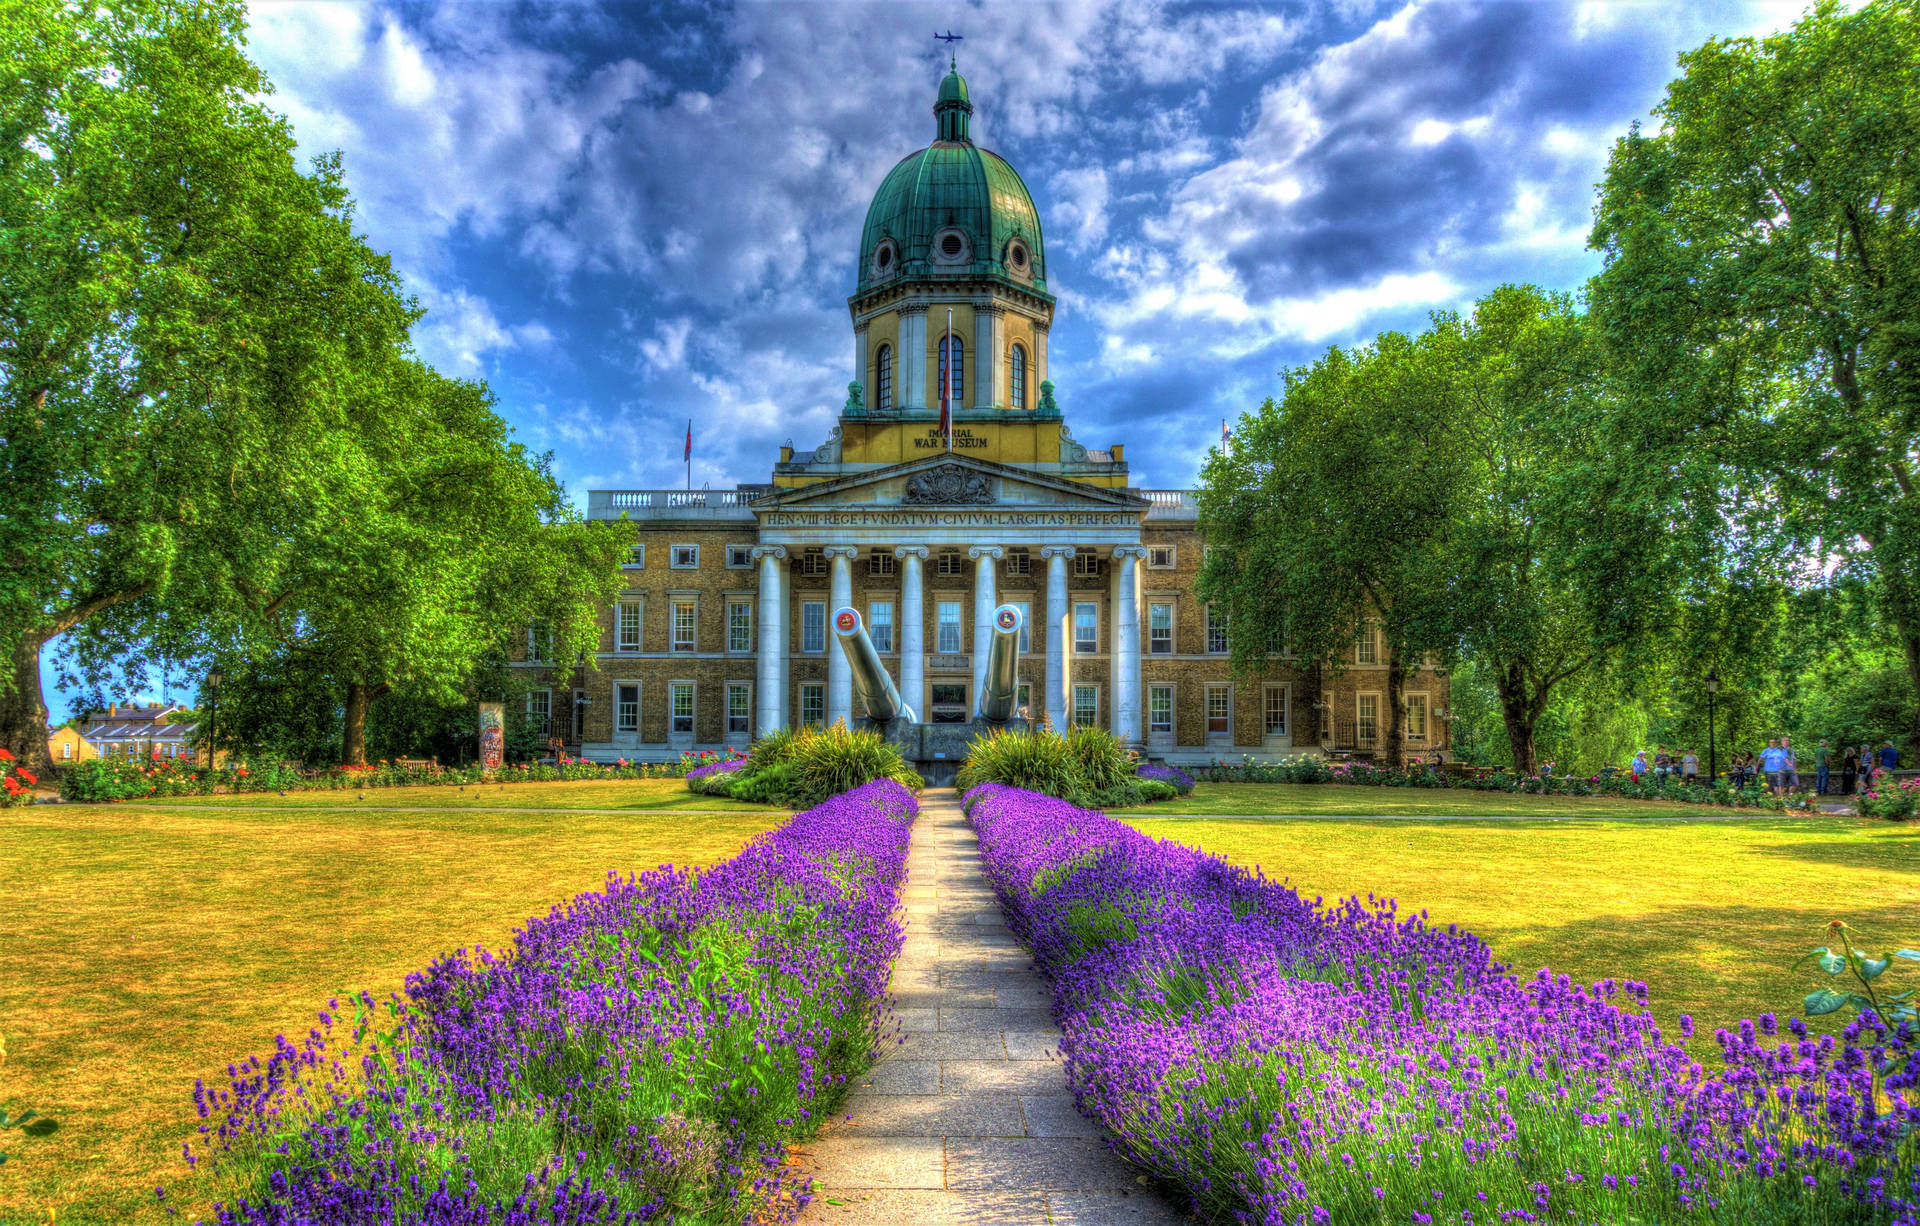 Imperial War Museum Background